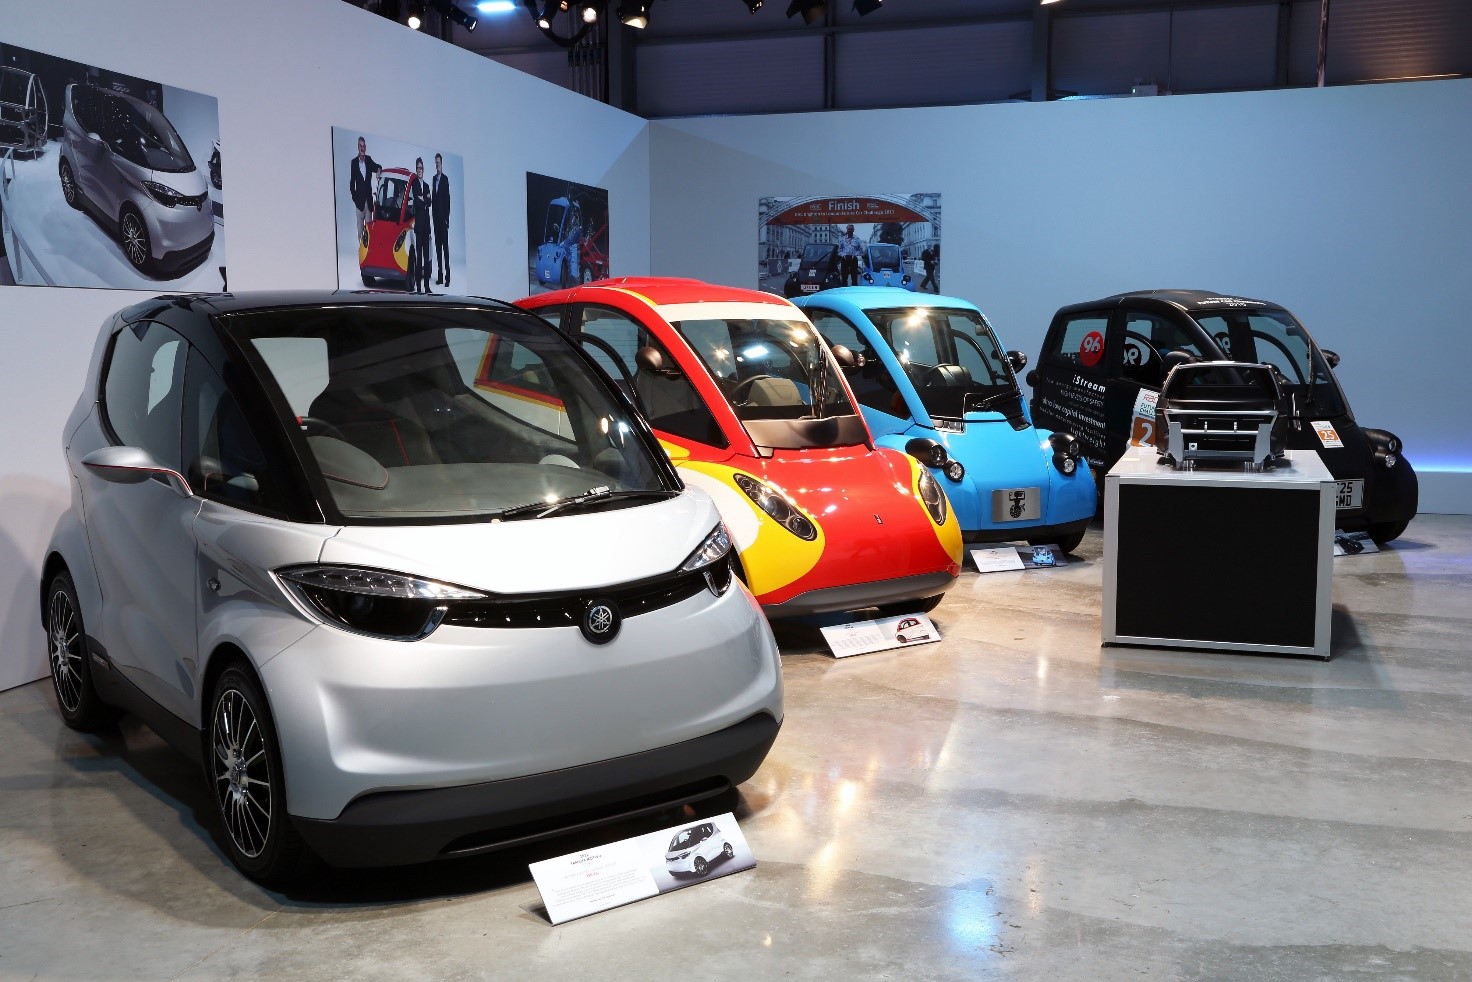 The 25 has sprung a collection of city cars that are ready for production.